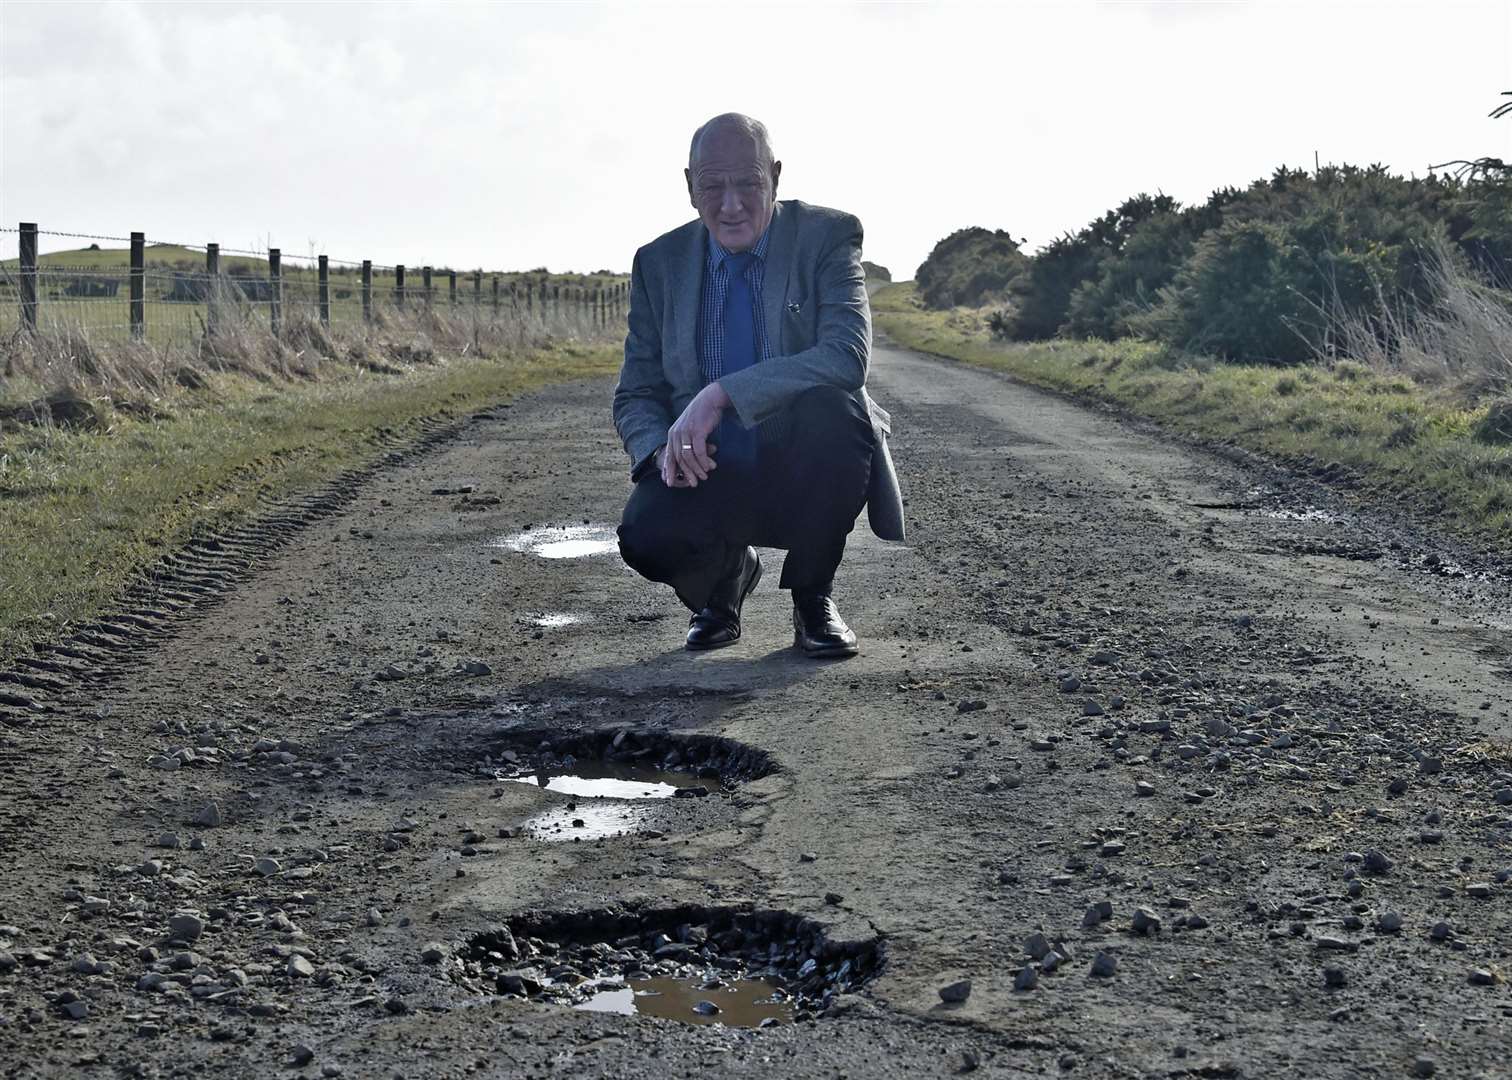 Iain Gregory says state of Caithness roads is "utterly catastrophic" and wants government funding to solve the problem. He is seen here viewing potholes at Tain, near Castletown.